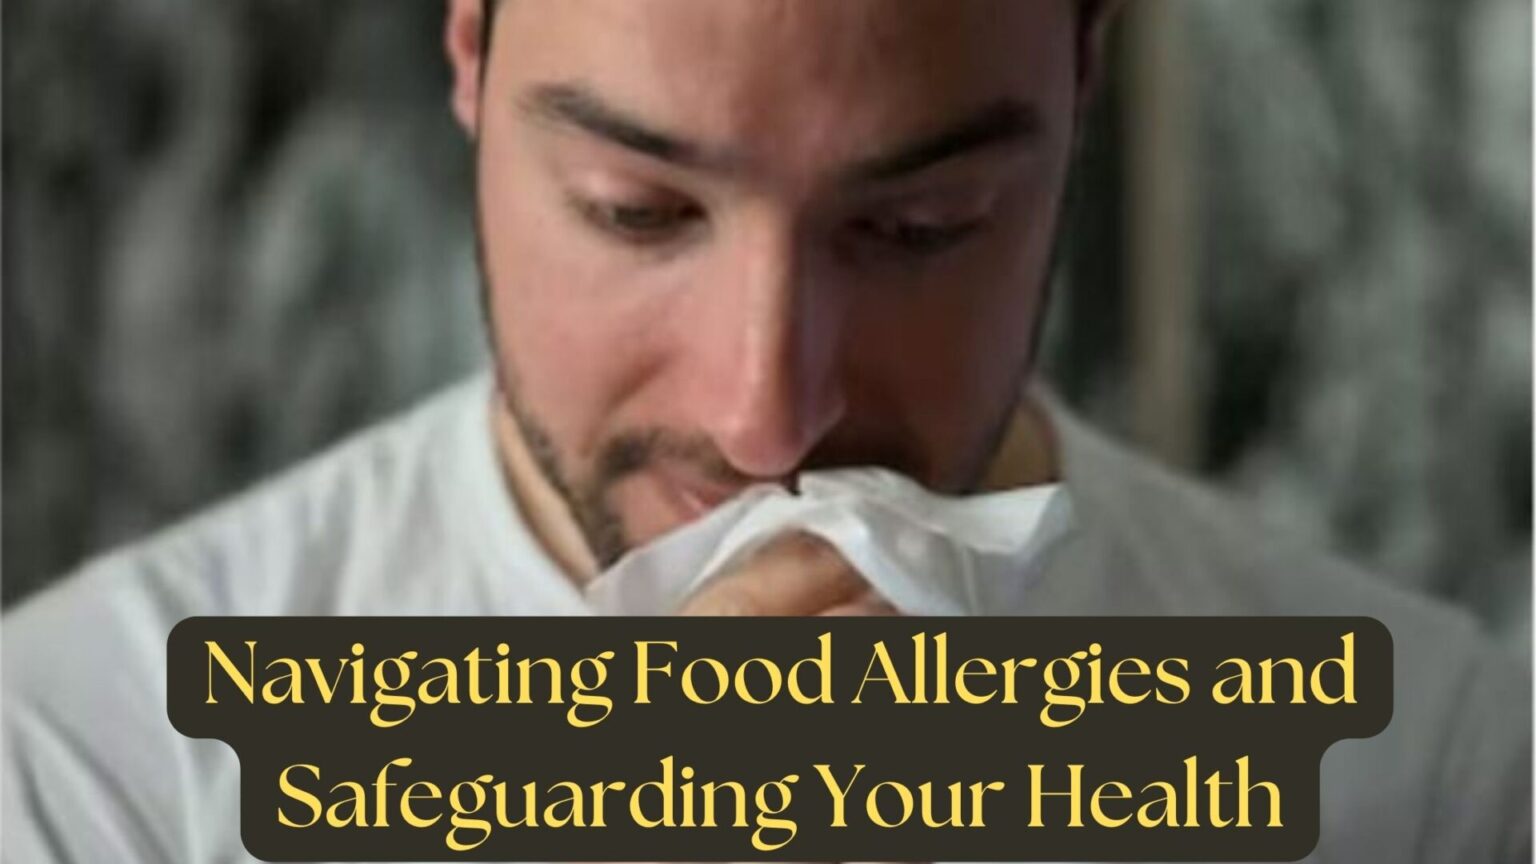 Navigating Food Allergies and Safeguarding Your Health